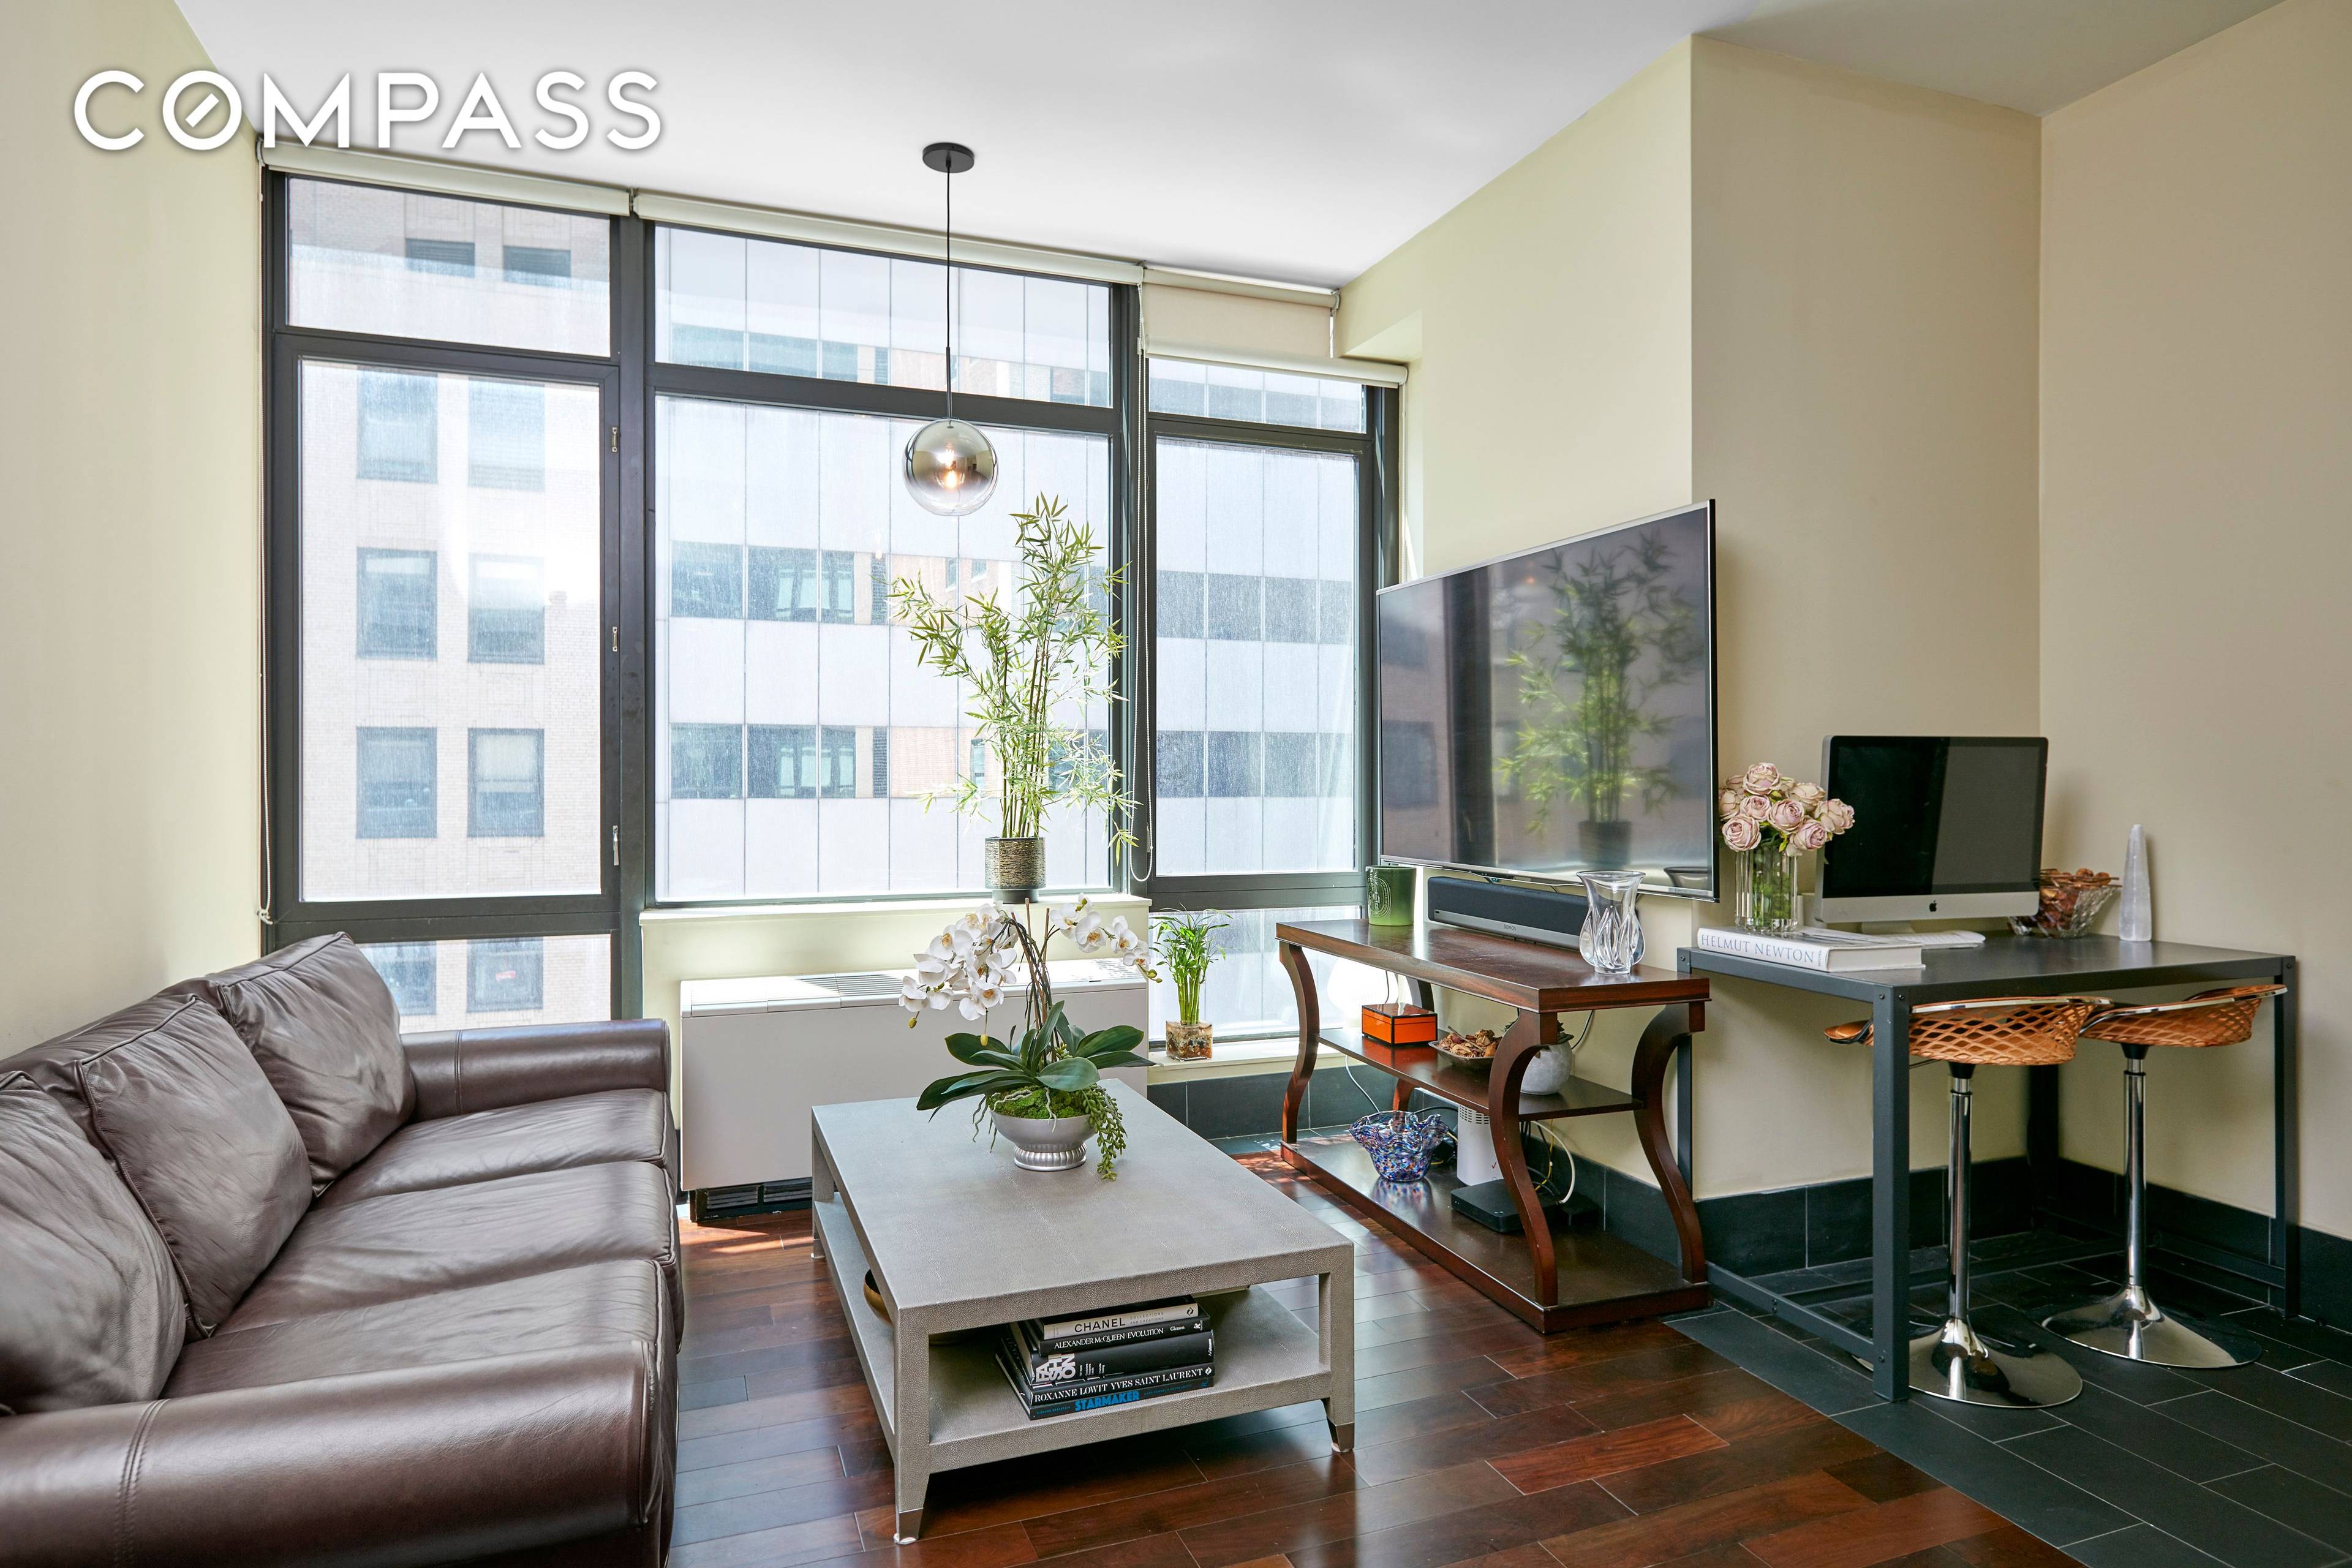 Welcome home to 40 Broad St, located in the heart of the Financial District.